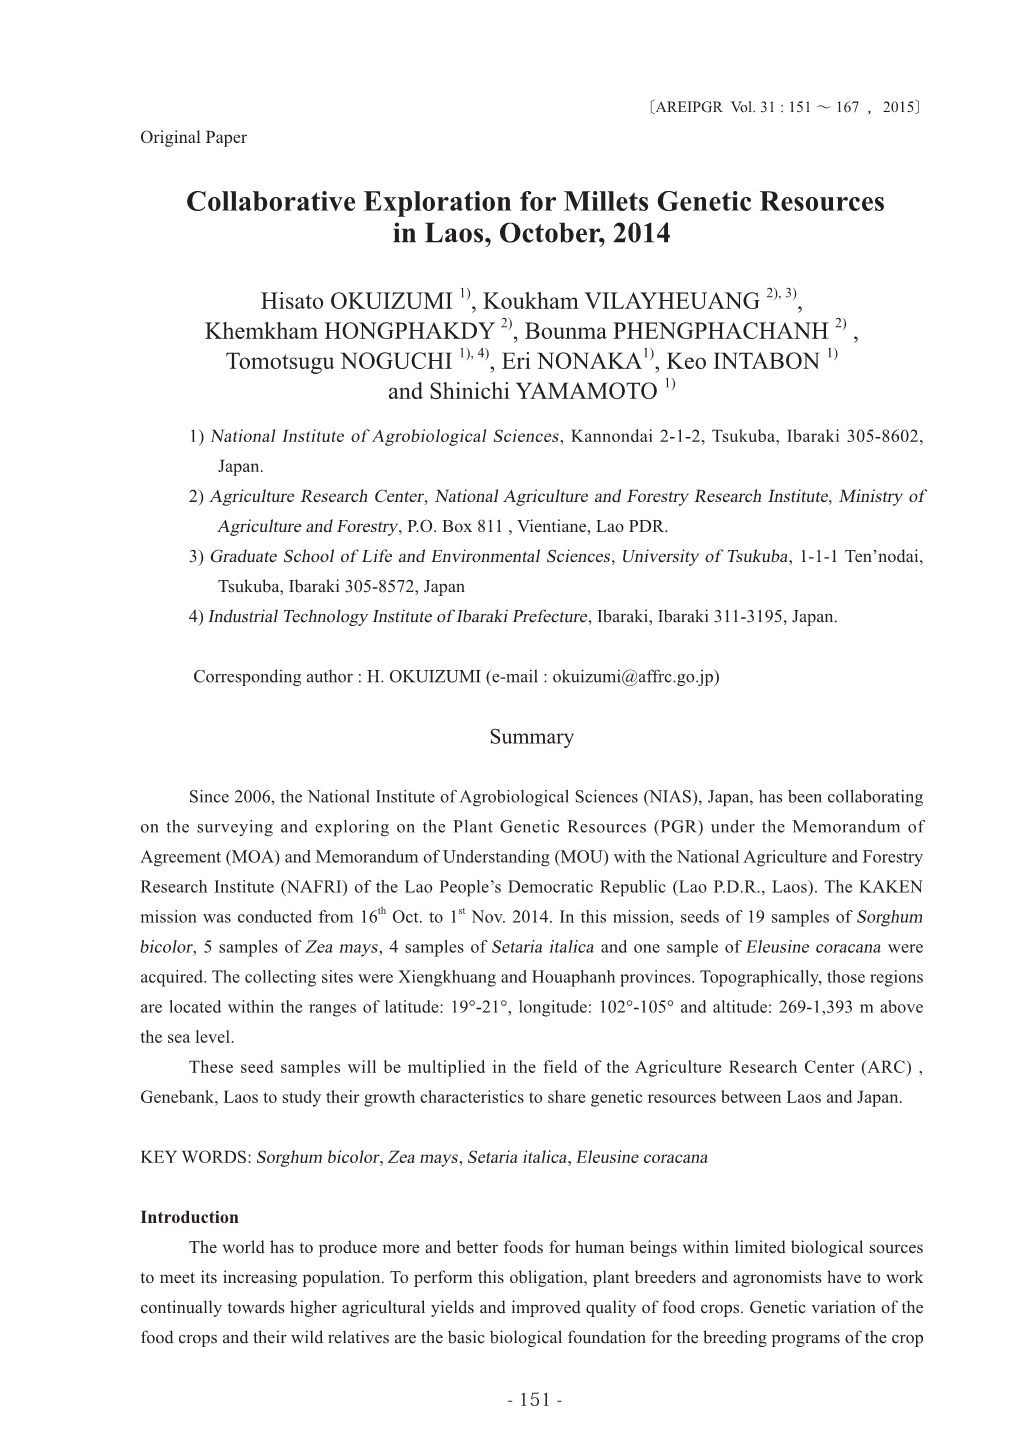 Collaborative Exploration for Millets Genetic Resources in Laos, October, 2014